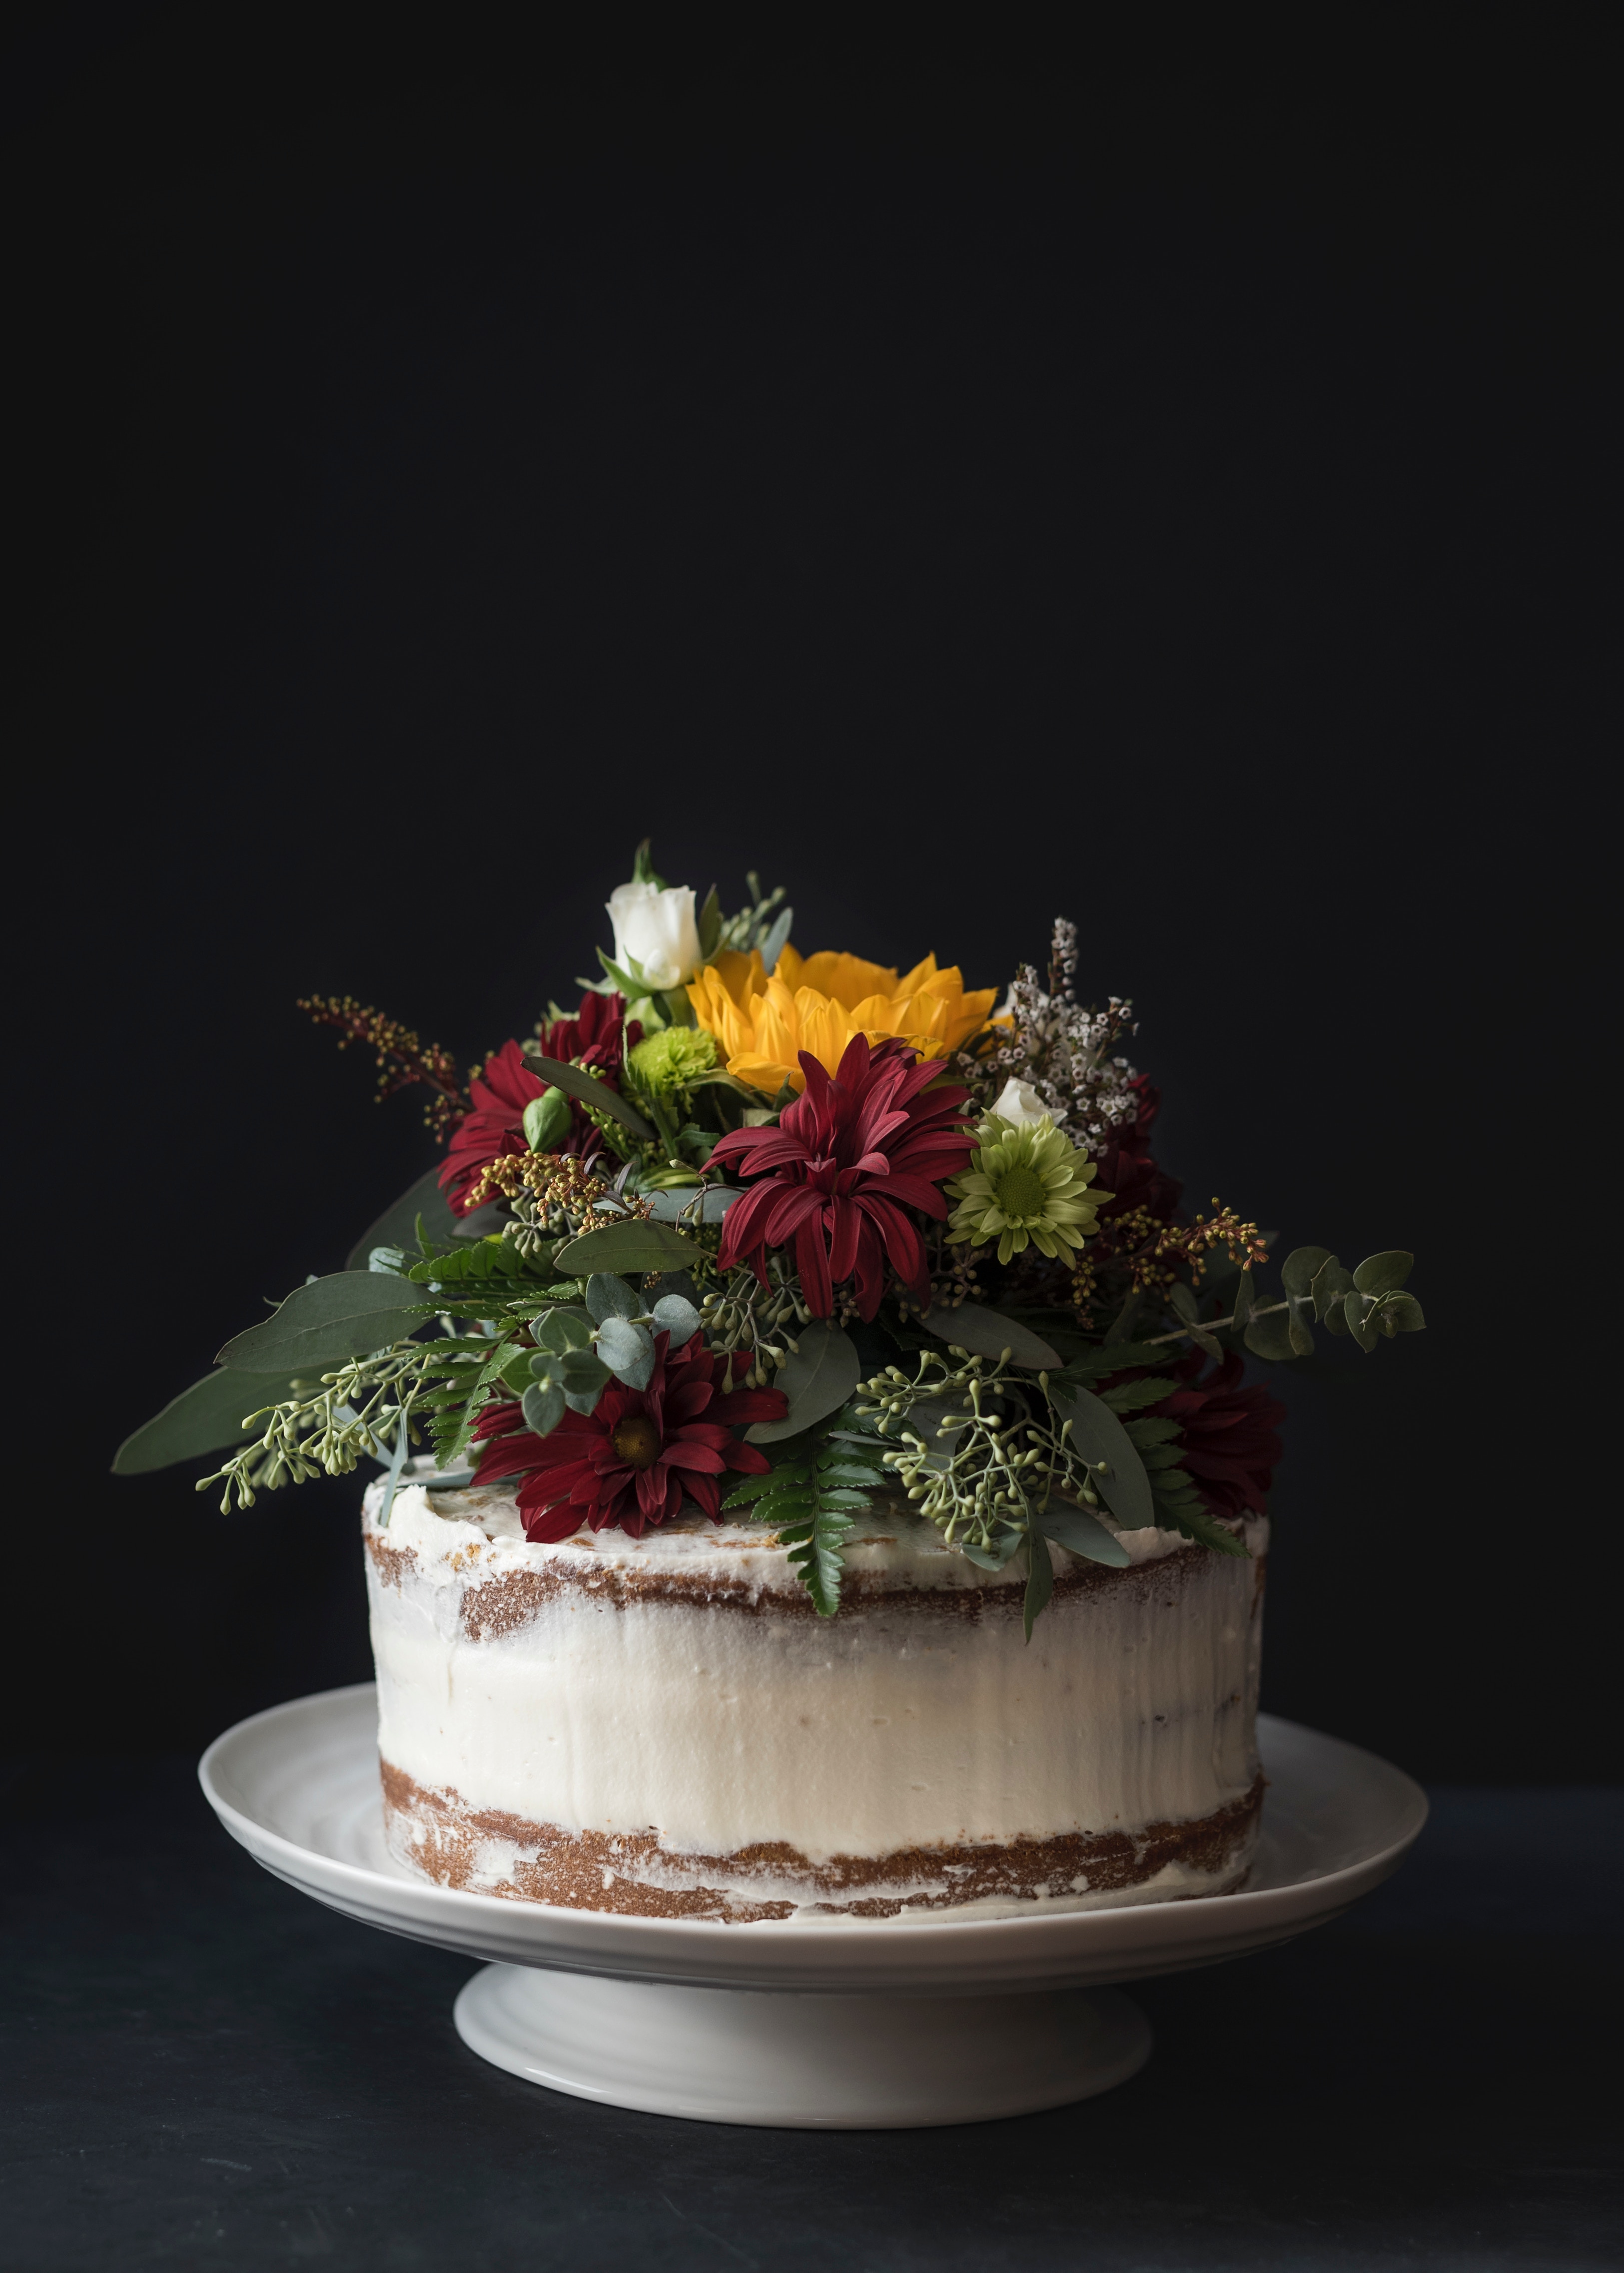 Free HD cake, flowers, food, desert, bakery products, baking